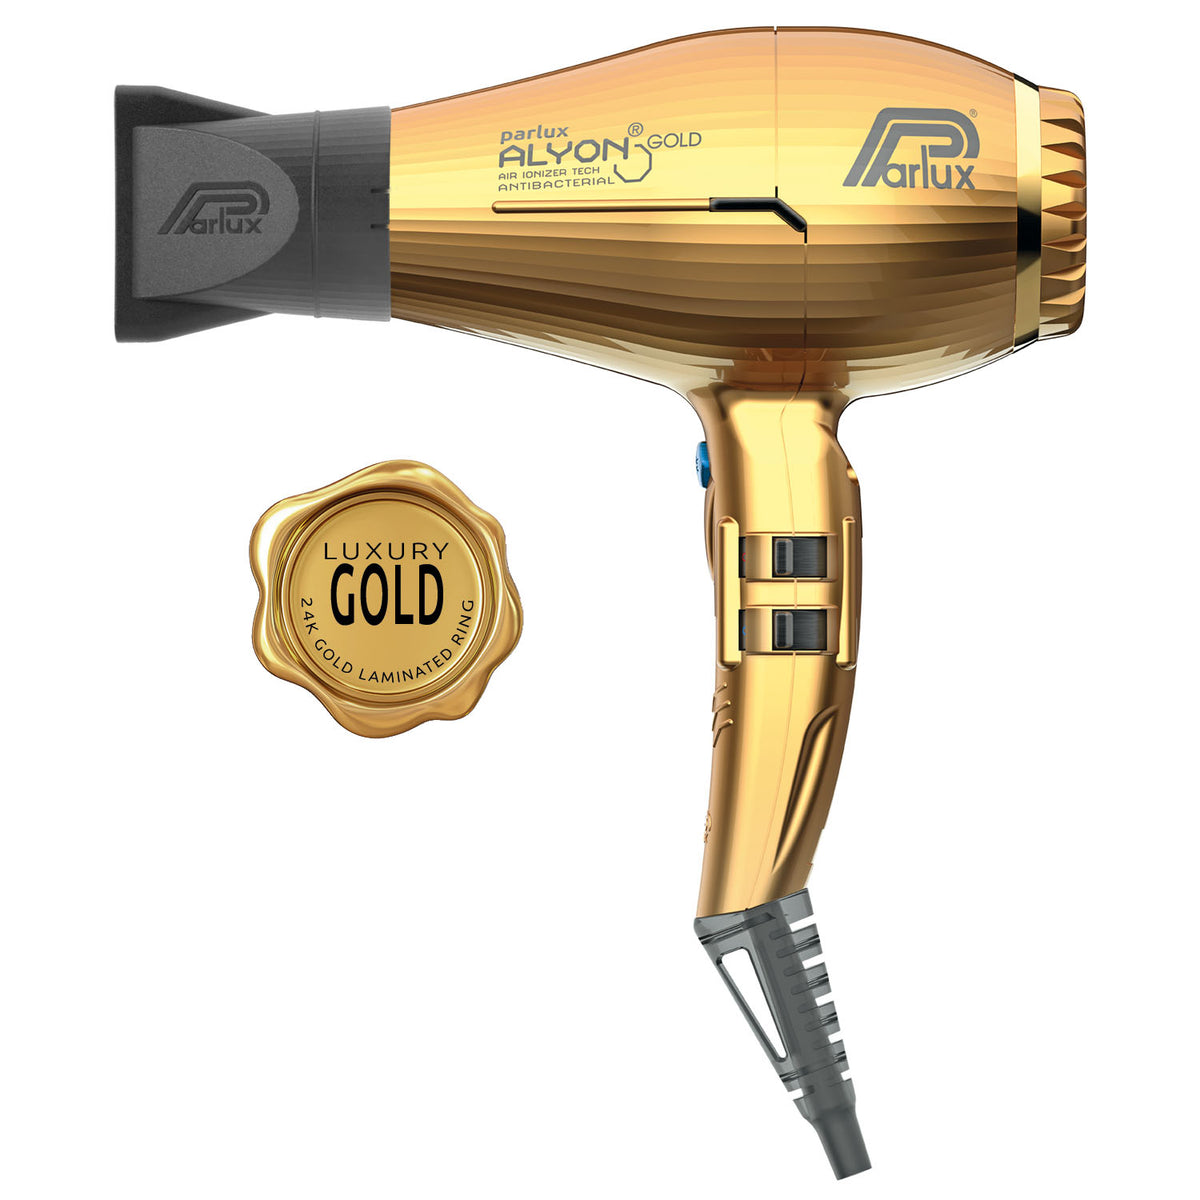 Parlux Alyon Gold Hair Dryer with Magic Sense Special Diffuser and M Hair  Designs Hot Blow Attachment Black (Bundle - 2 Items) 